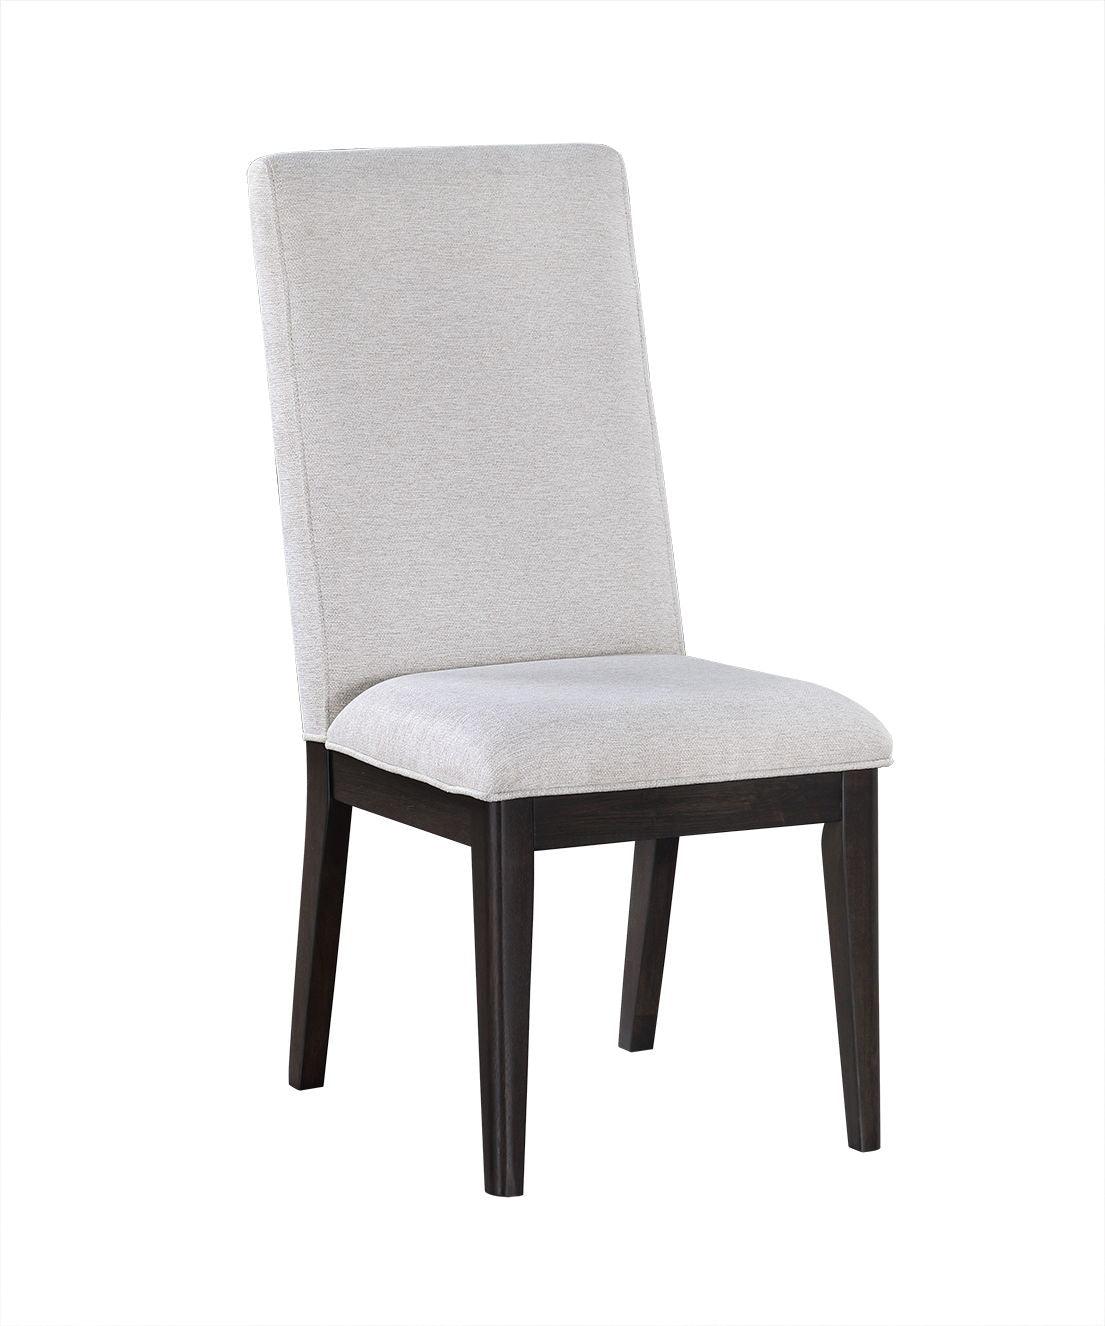 Coaster Fine Furniture - Hathaway - Upholstered Dining Side Chair (Set of 2) - Cream - 5th Avenue Furniture